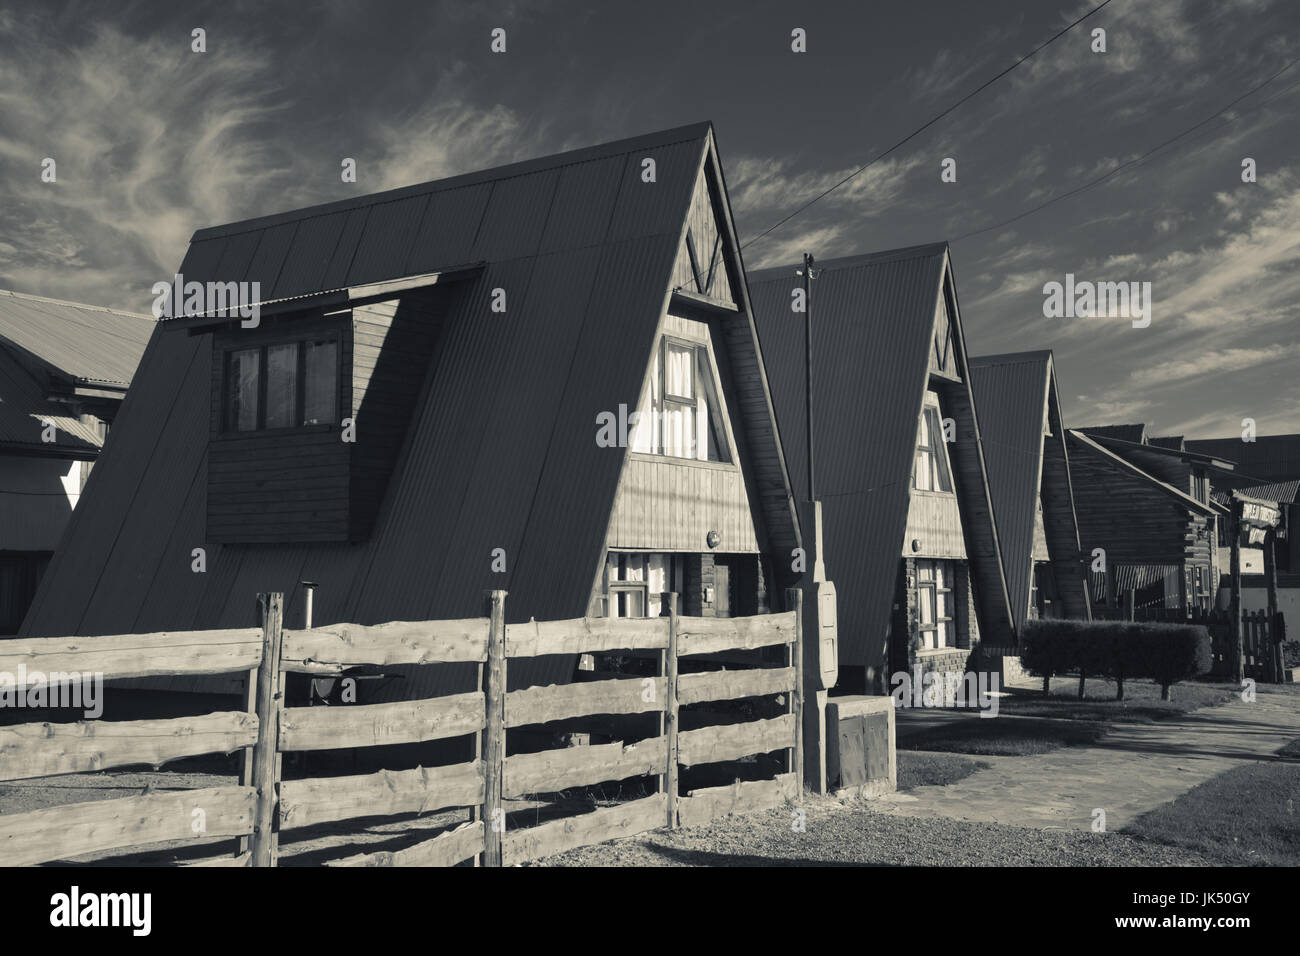 Argentina, Patagonia, Chubut Province, Esquel, A-frame houses Stock Photo